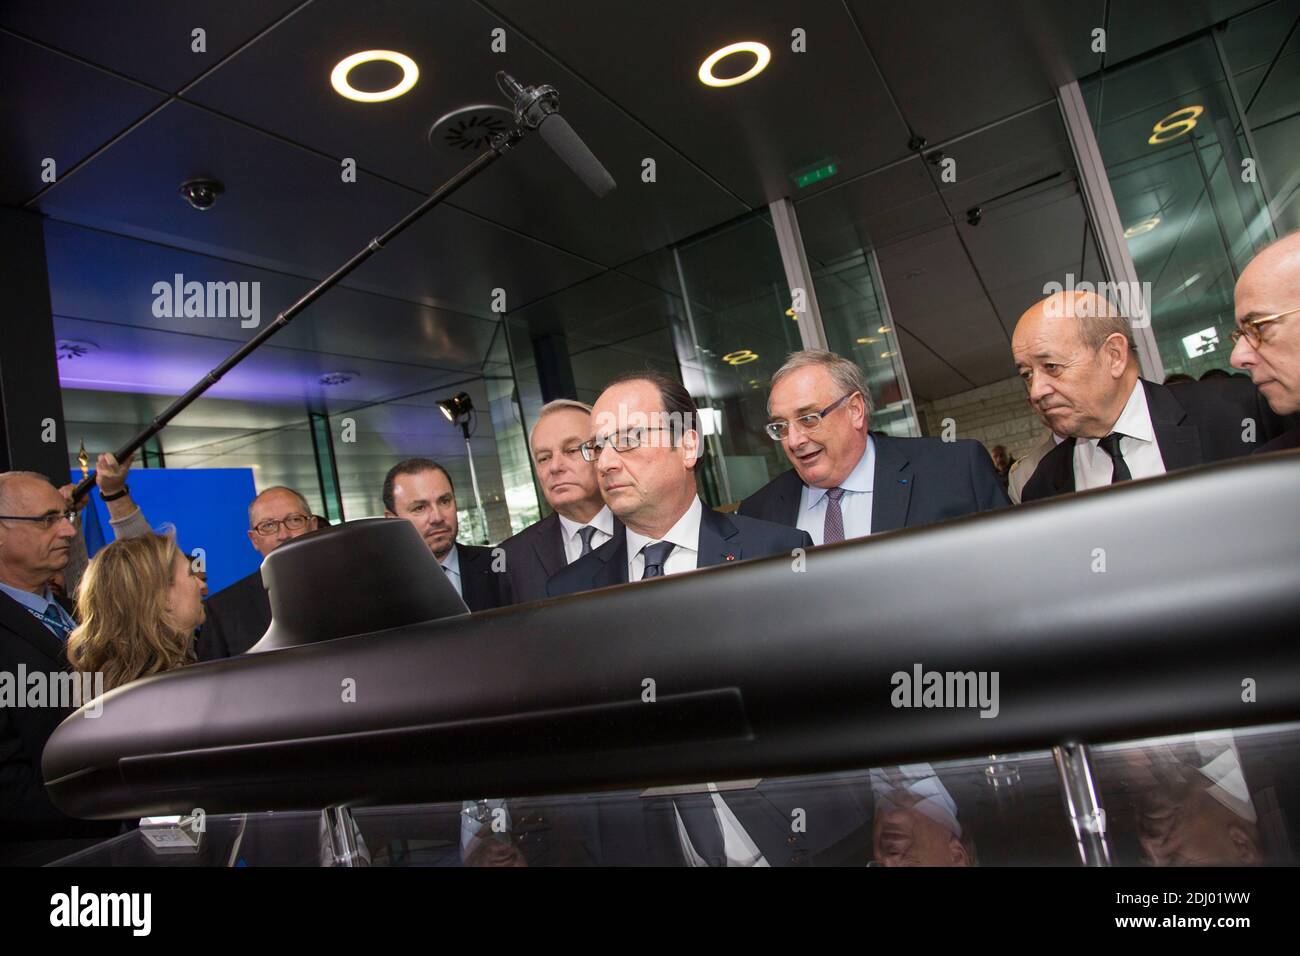 French President Francois Hollande along with Minister of Foreign Affairs  and International Development Jean-Marc Ayrault, DCNS CEO Herve Guillou,  Minister of Defence Jean-Yves Le Drian and Minister of the Interior Bernard  Cazeneuve